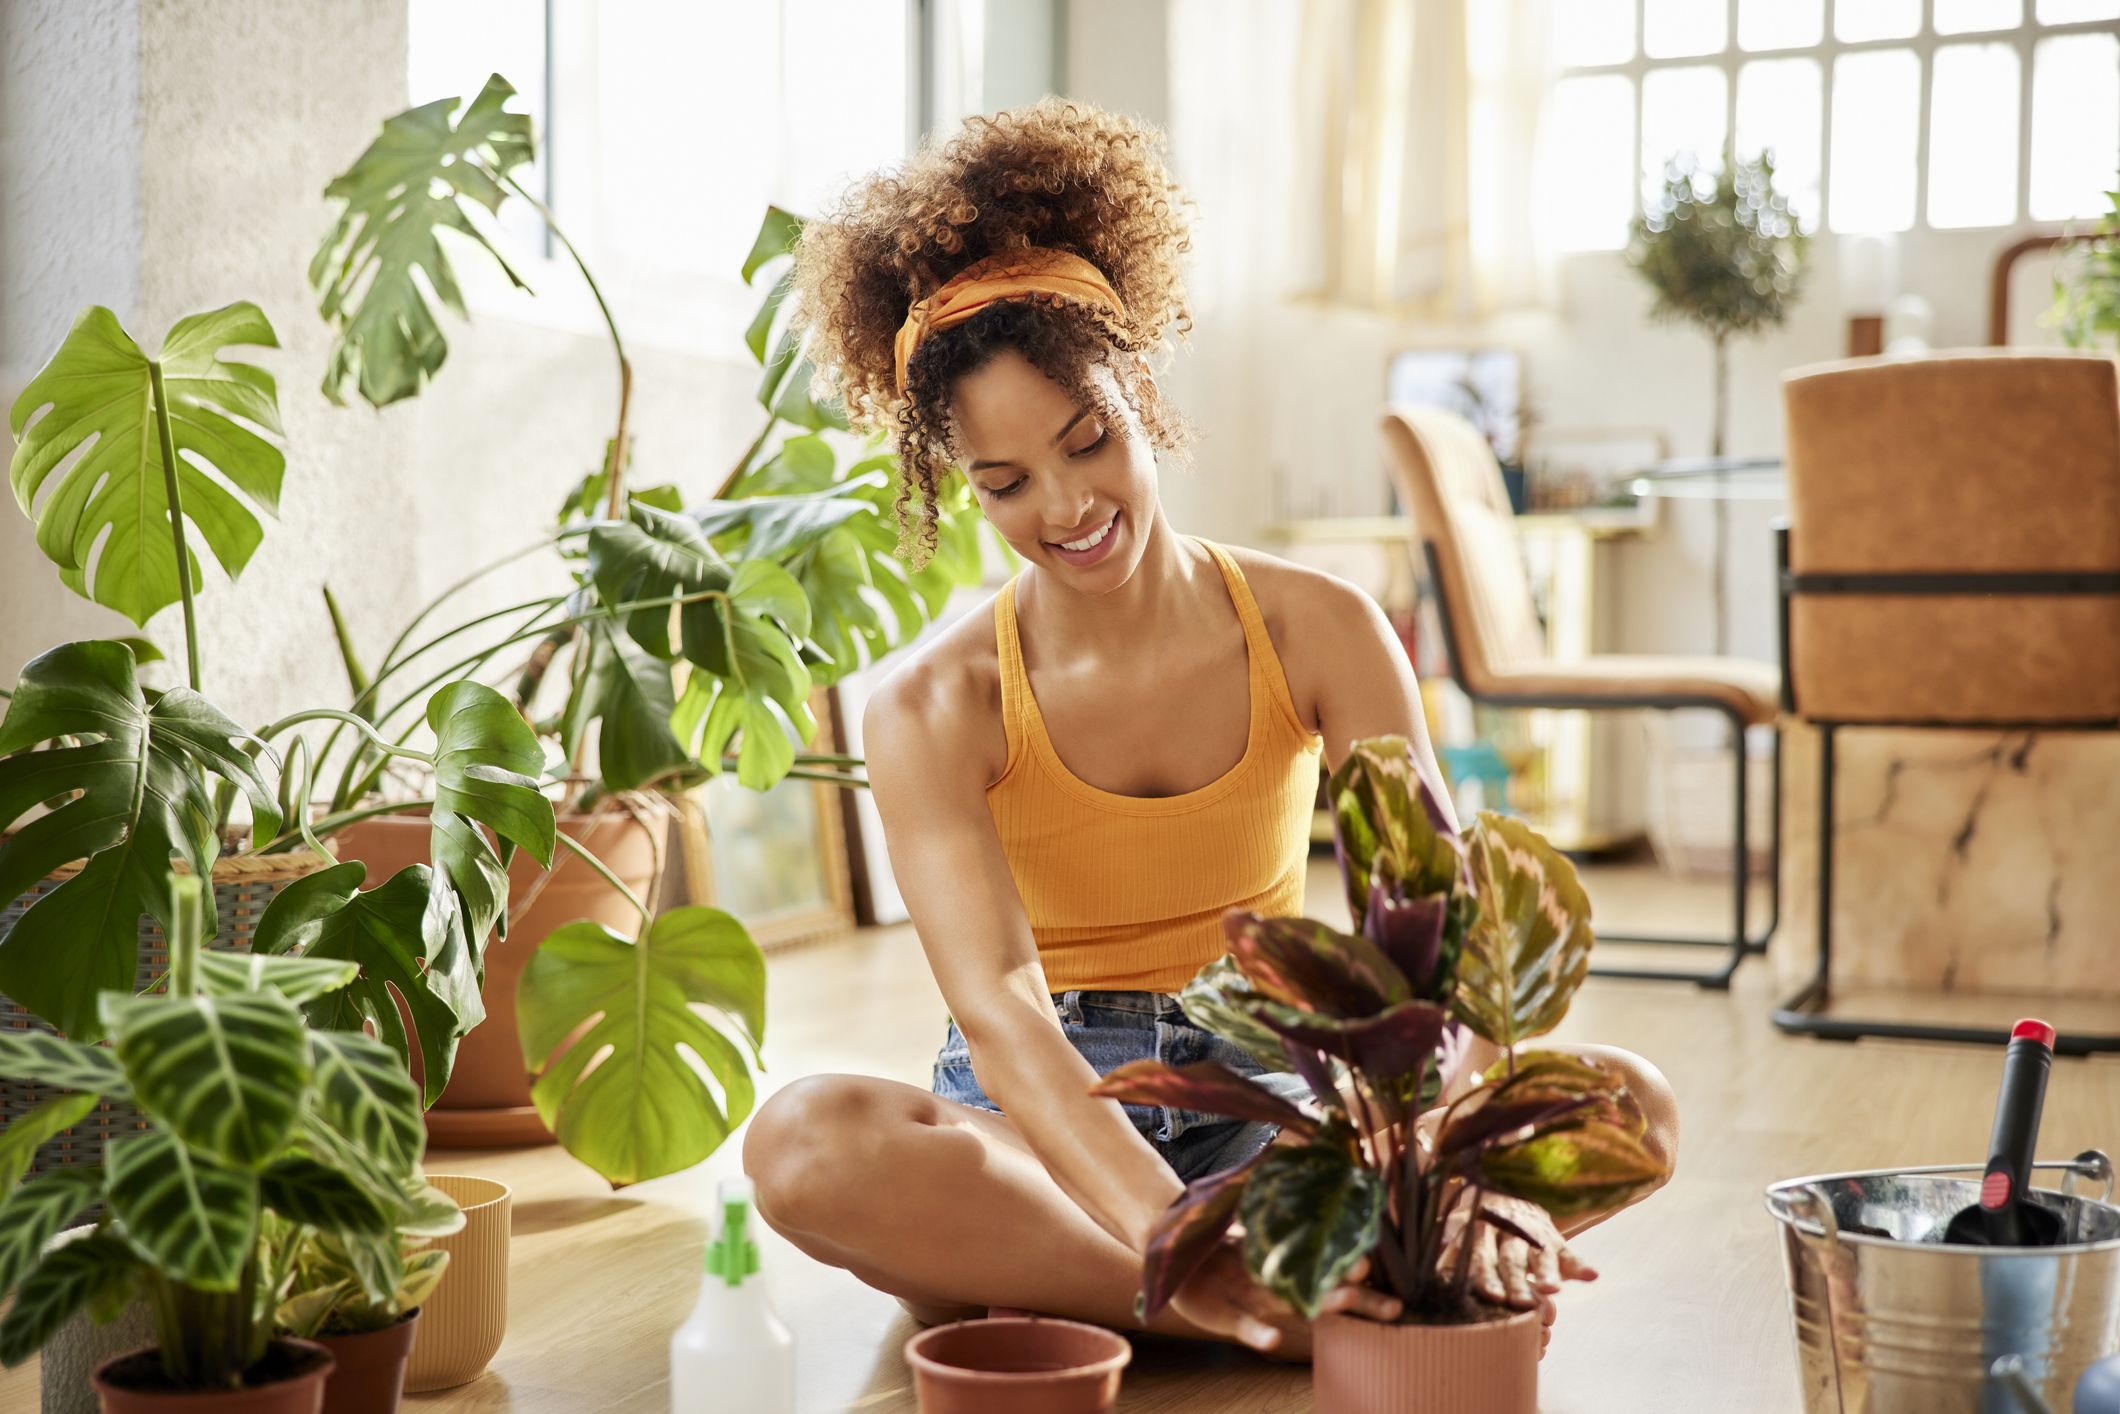 5 Indoor Plants That Are Easy to Take Care Of